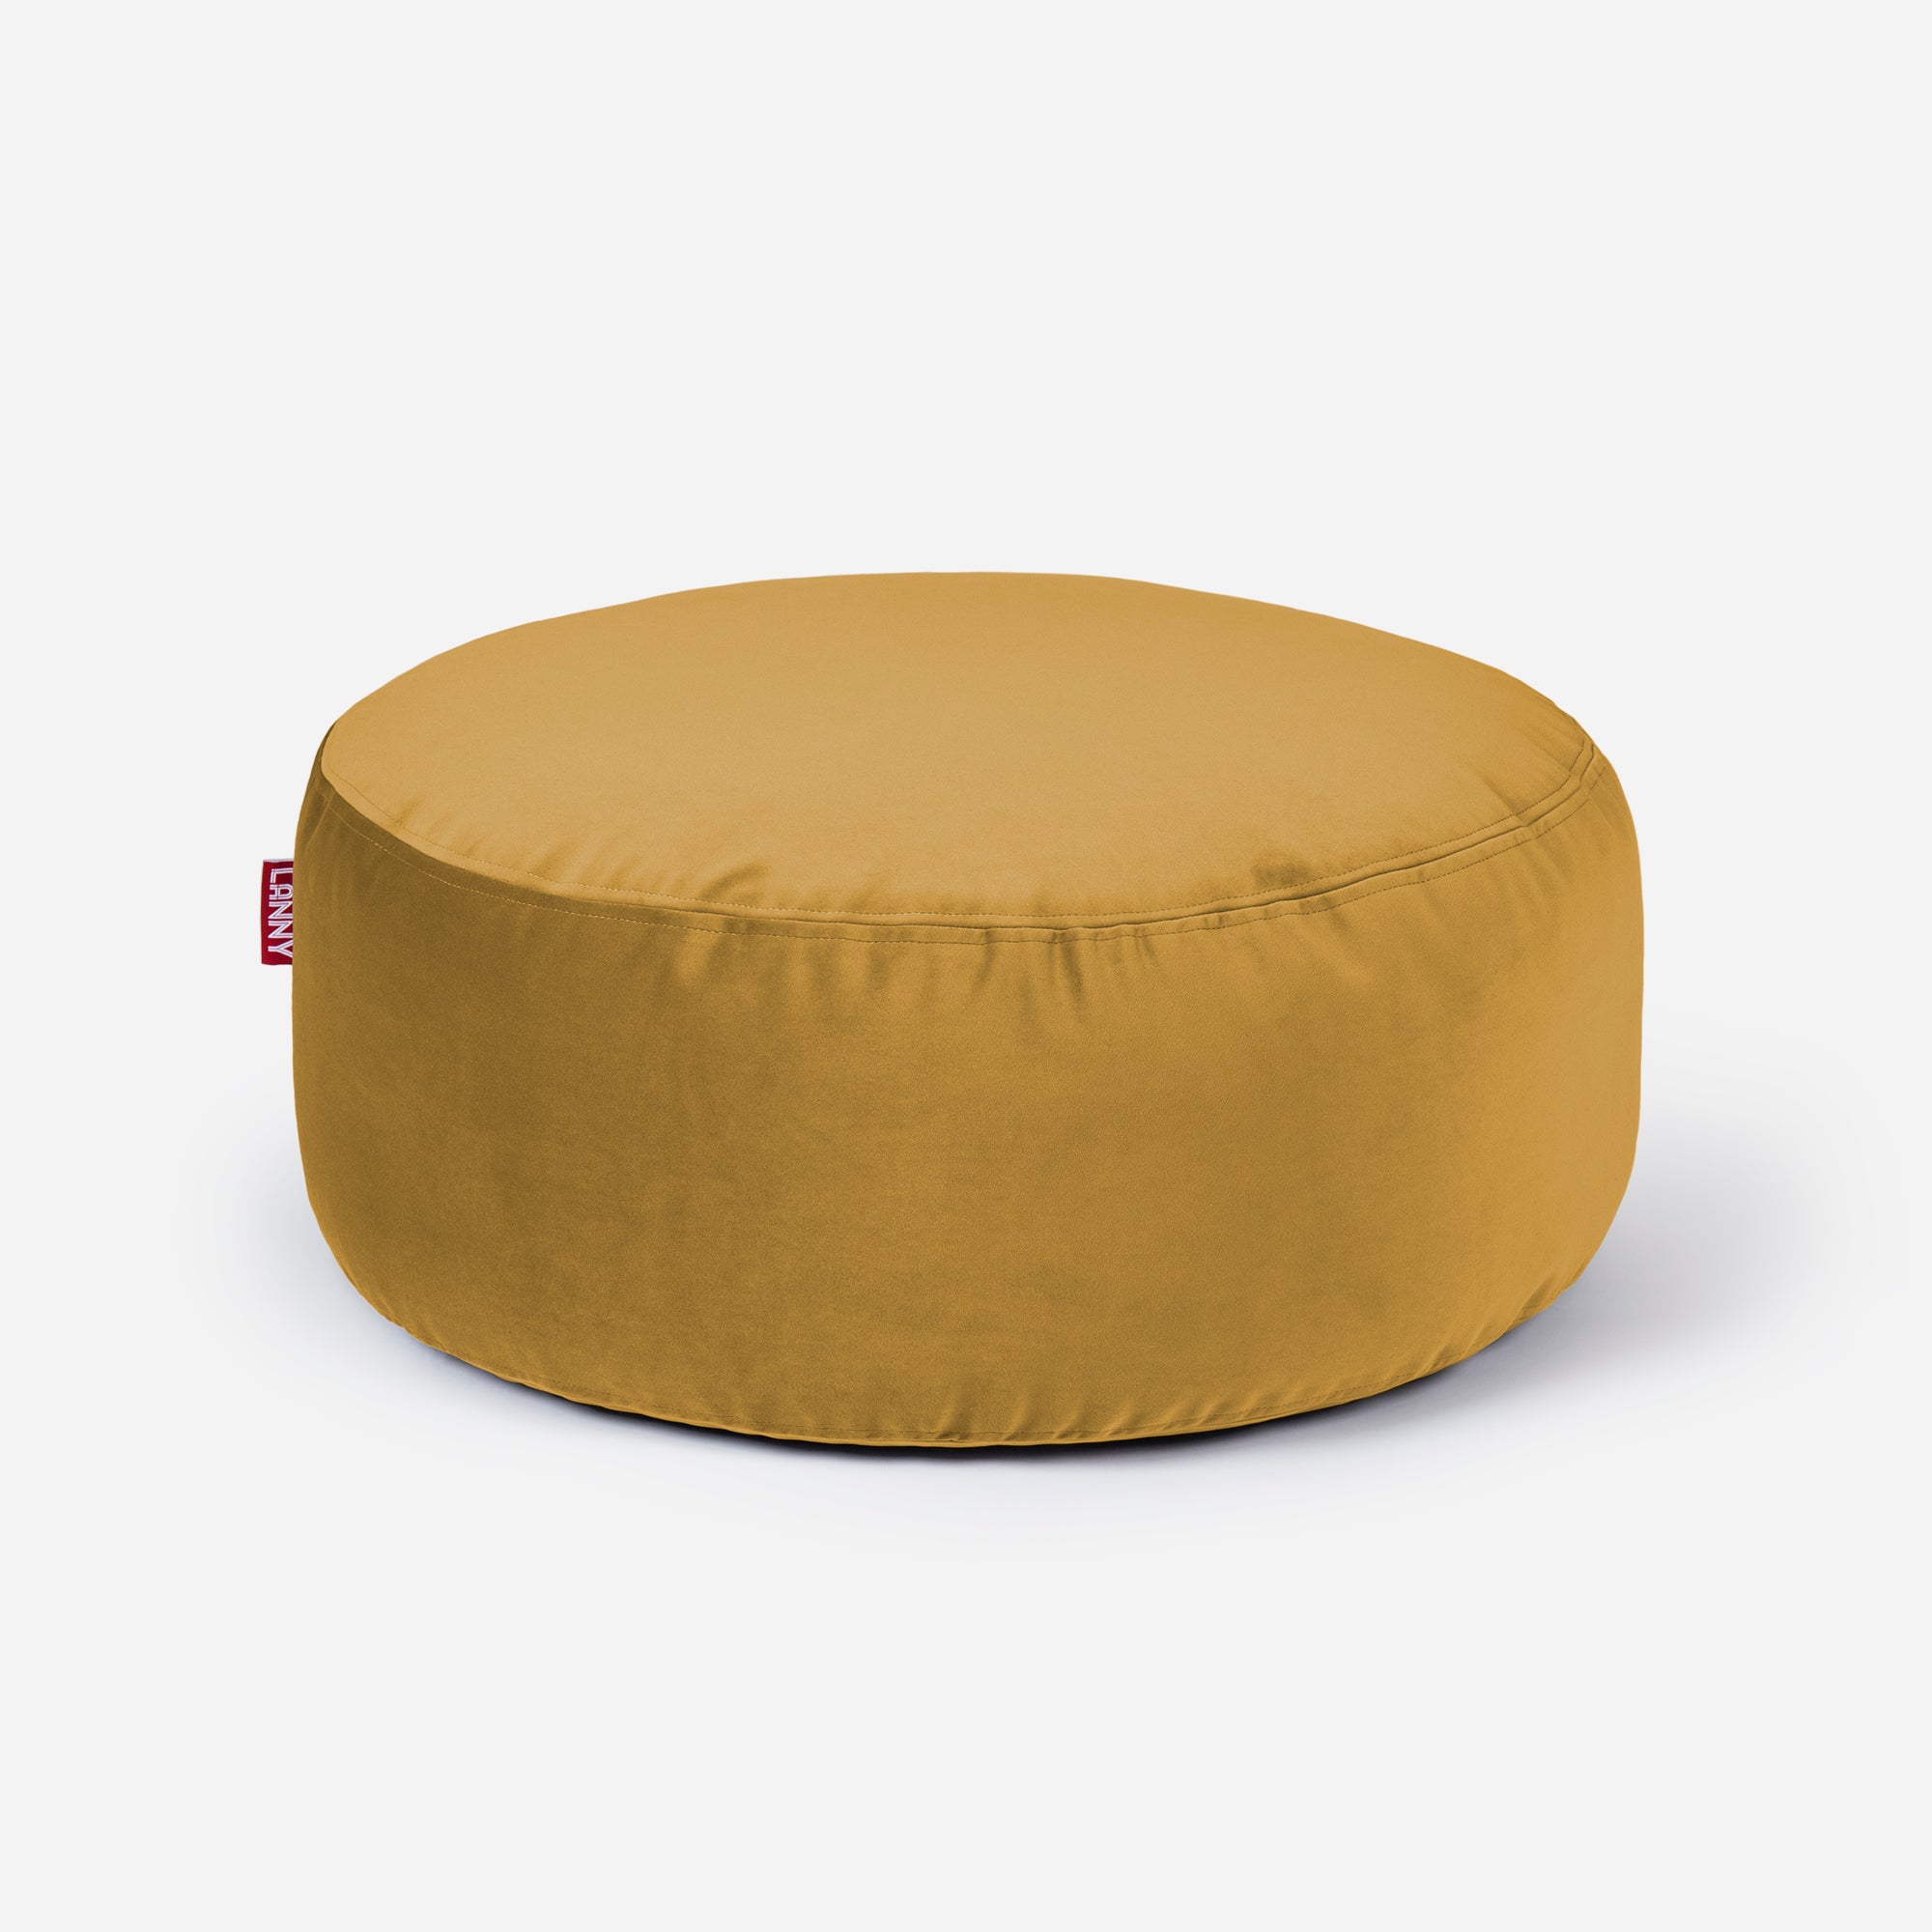 Lanny pouf made from velvet fabric in Mustard color